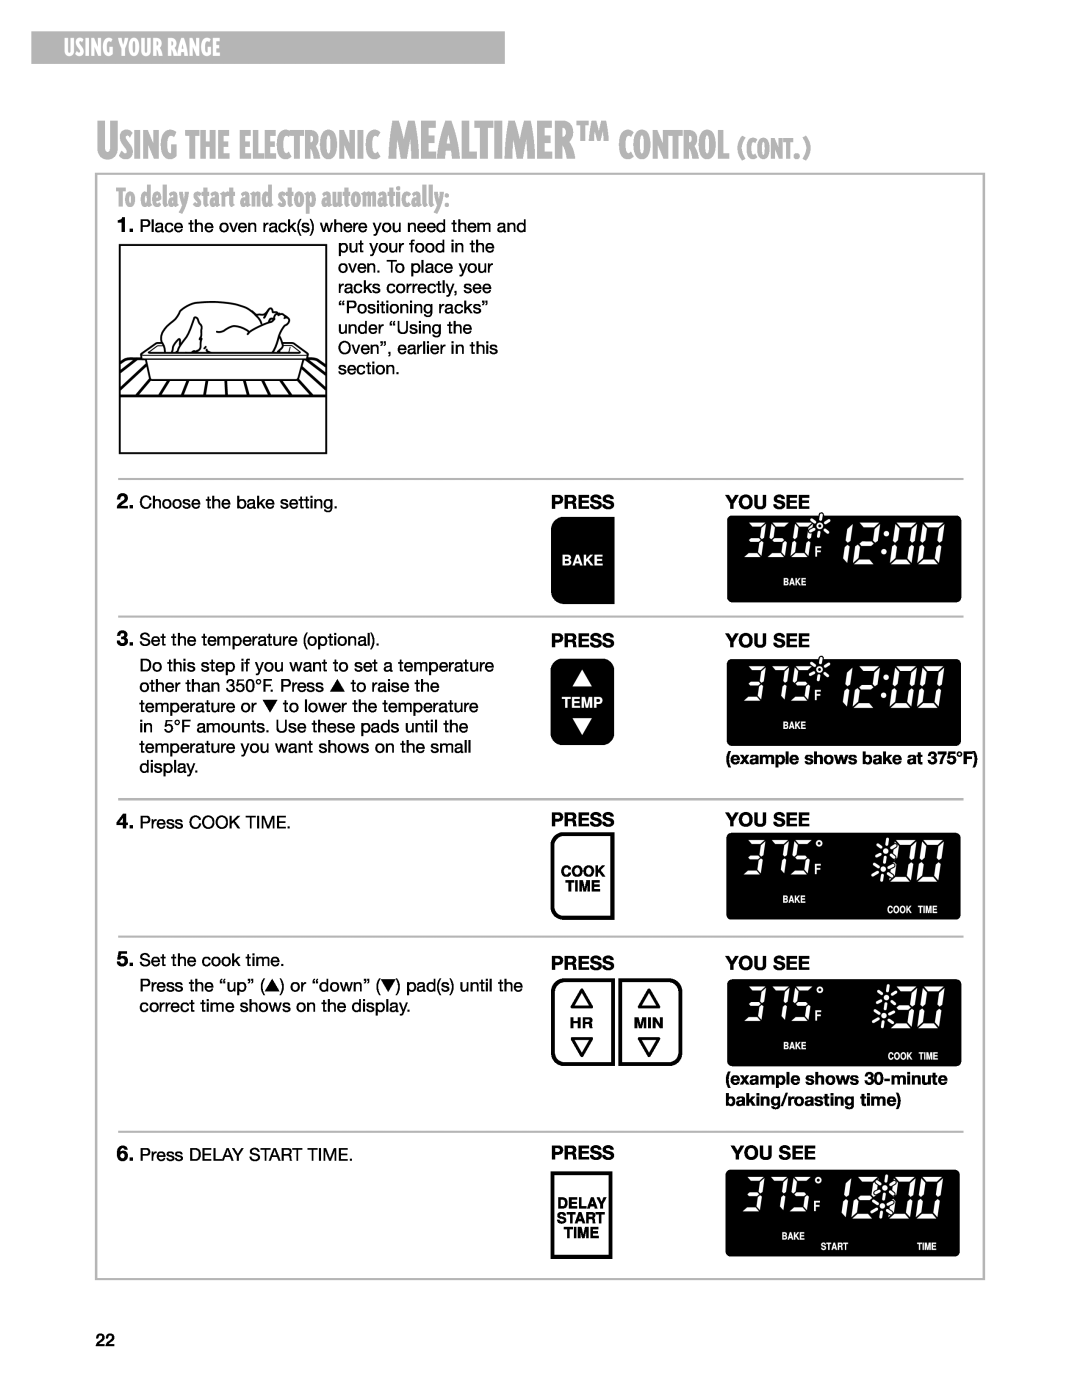 Whirlpool F195LEH To delay start and stop automatically, Using The Electronic Mealtimerª Control Cont, Using Your Range 